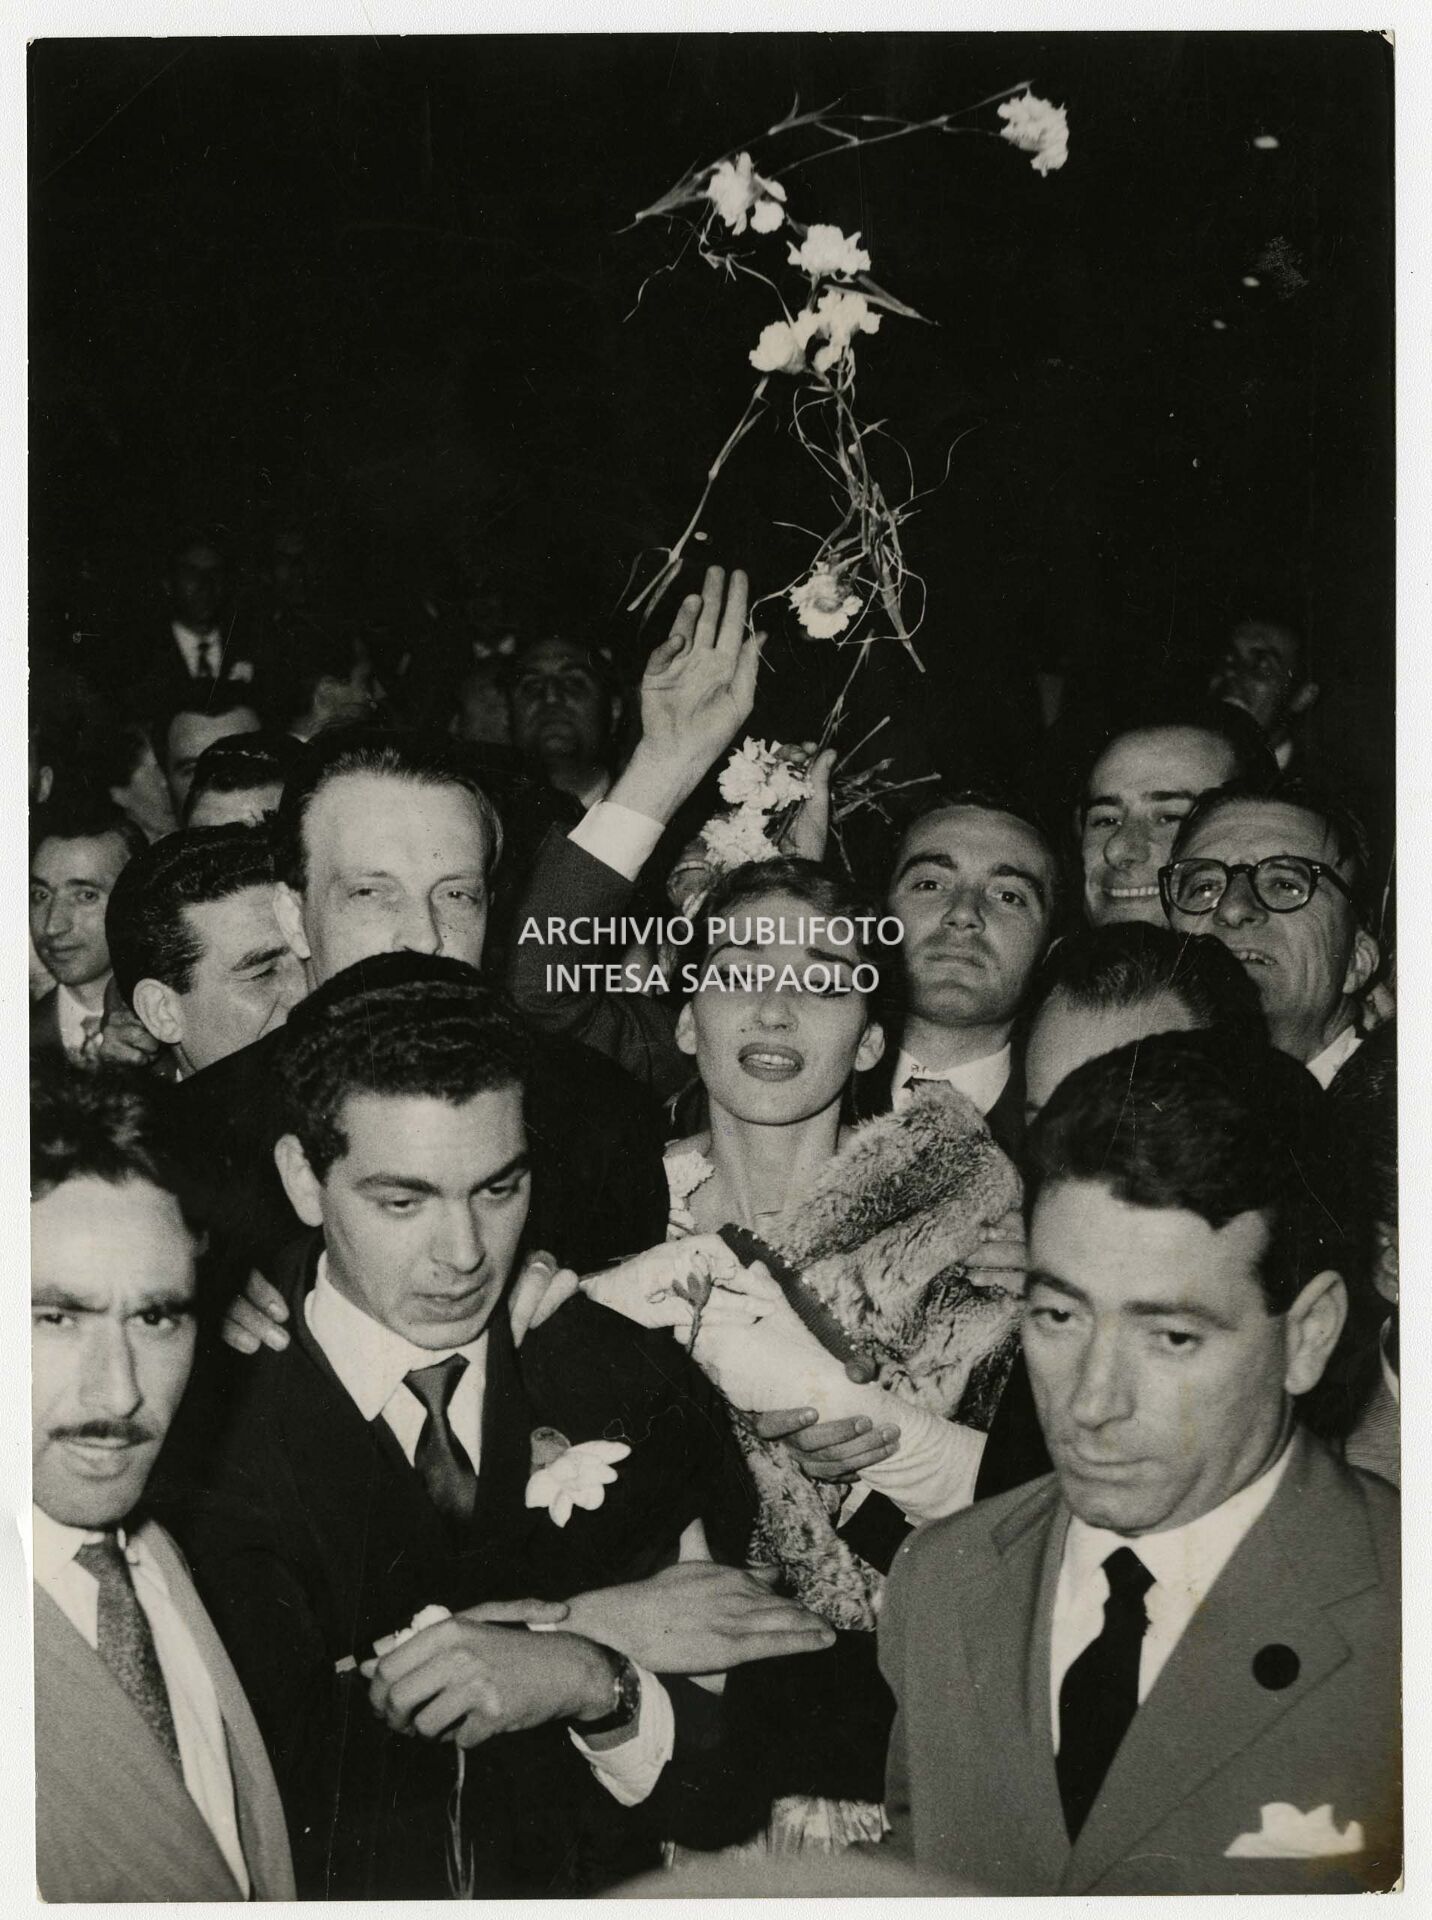 Maria Callas surrounded by admirers at the end of her "last" appearance at La Scala, where she performed Vincenzo Bellini's Il Pirata.